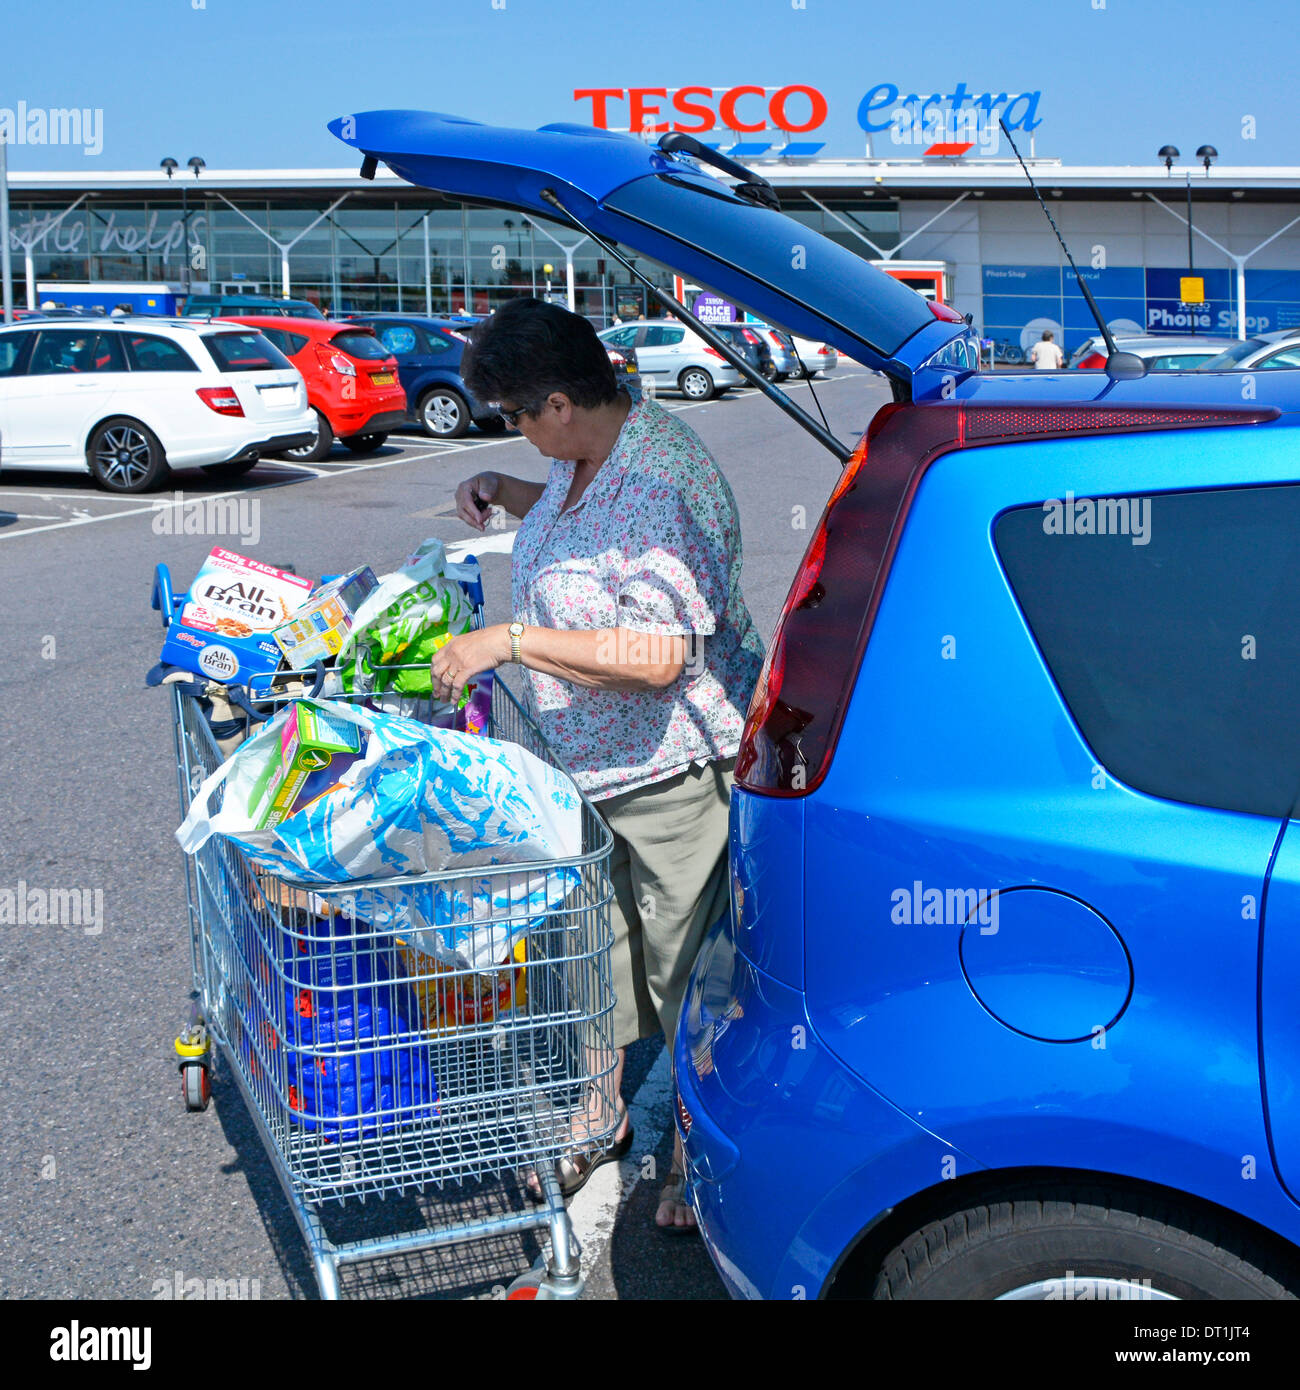 Tesco Extra supermarket store free car park and mature woman loading food shopping into hatchback car Stock Photo